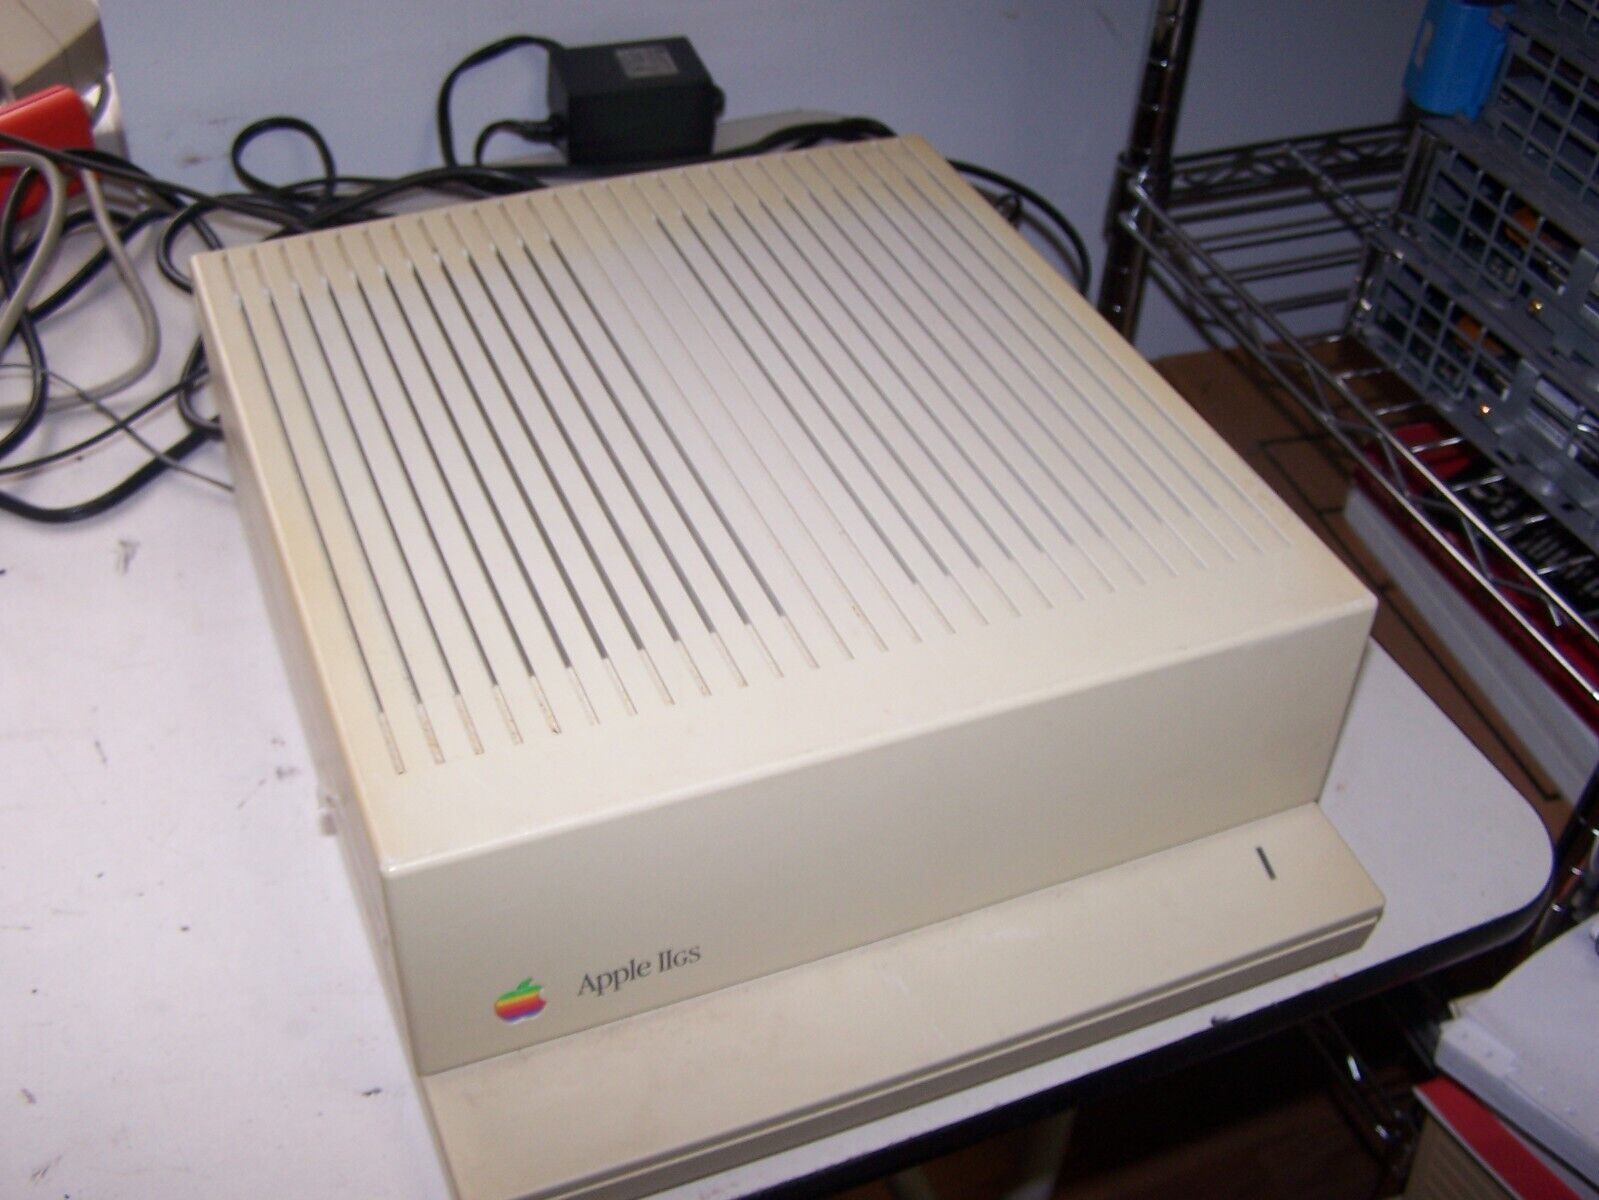 Apple IIGS Model A2S6000 ROM 01 Unit with 1MB Memory Card